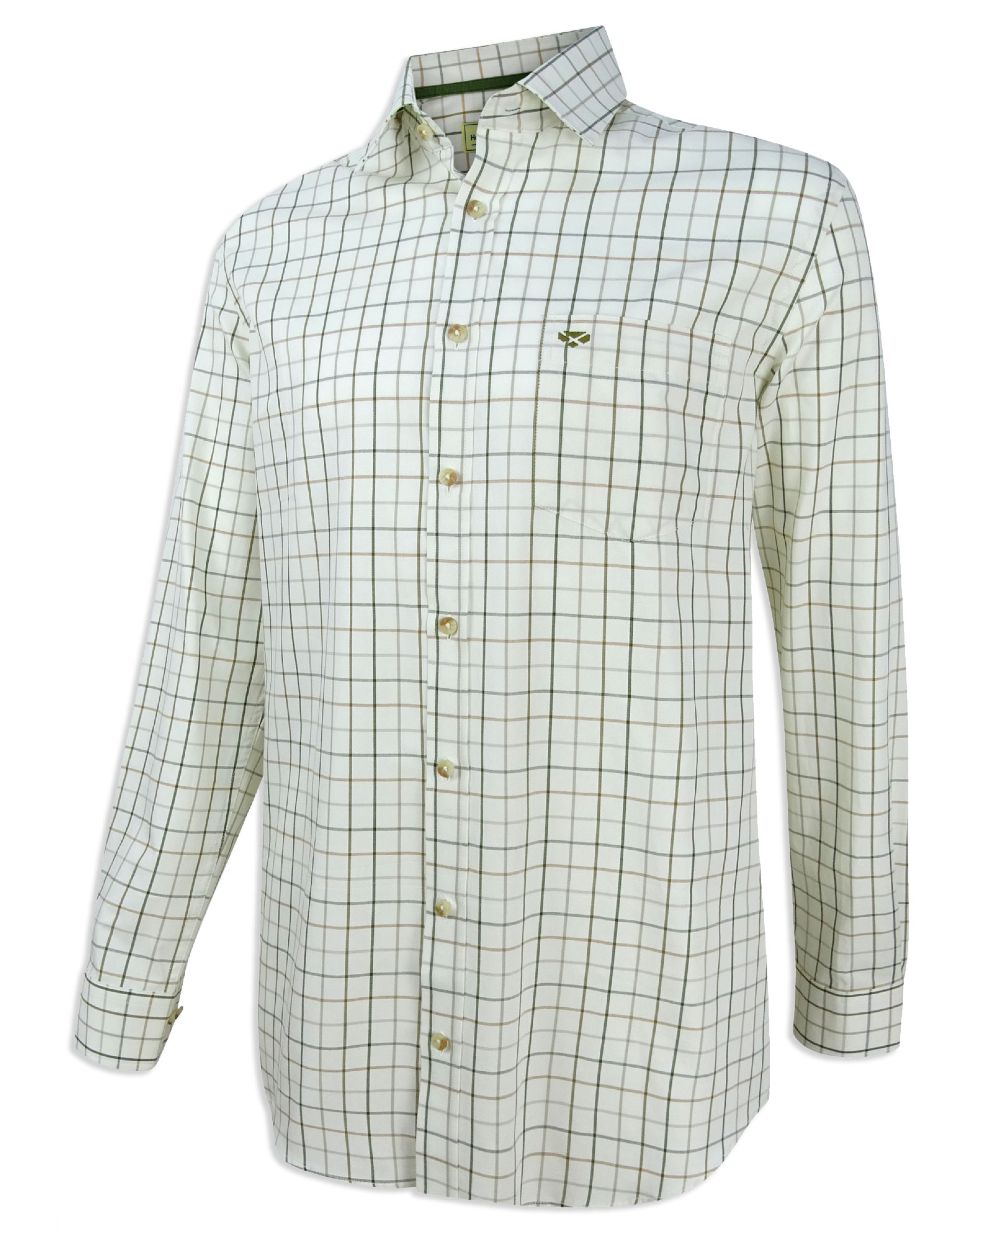 Hoggs of Fife Balmoral Luxury Tattersall Shirt in Green Brown 